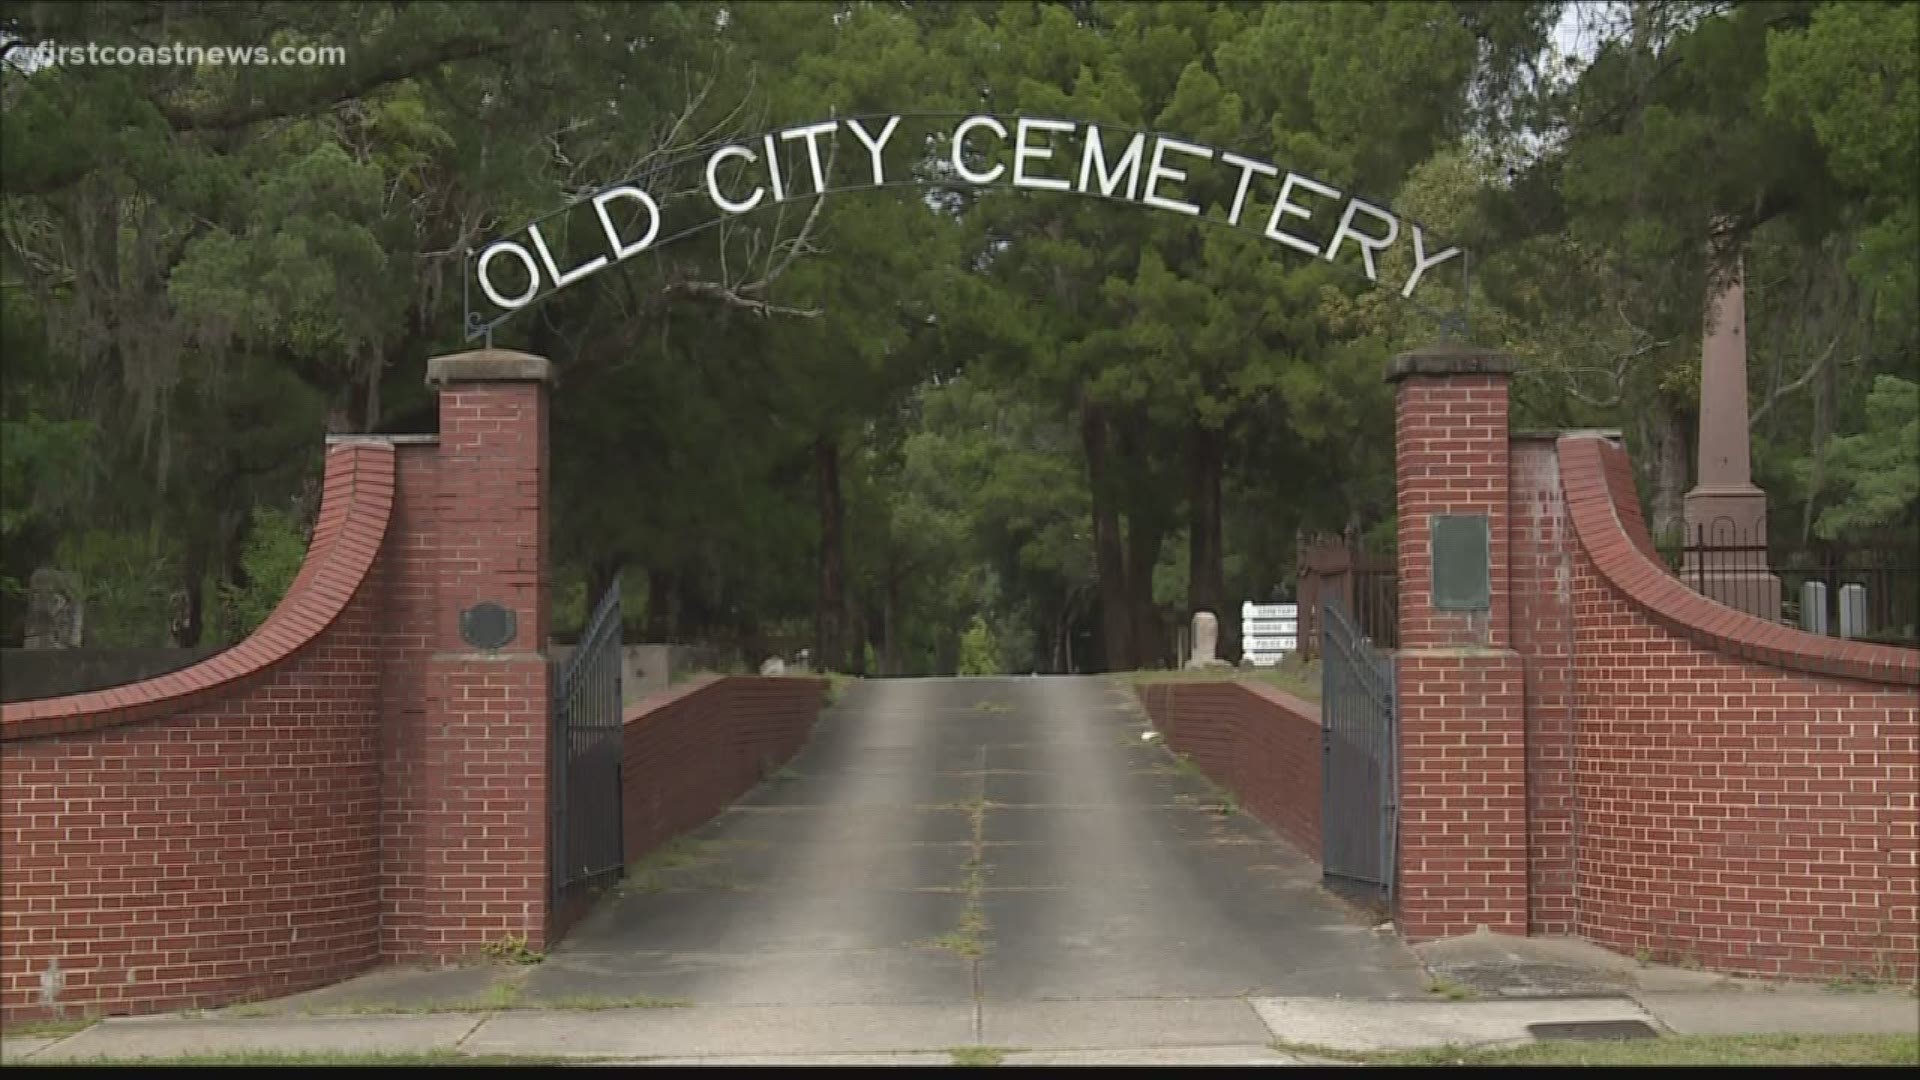 The grave of a Jacksonville police officer fell into disrepair in the 122 years since his death. A group dedicated to restoring Old City Cemetery is changing that.